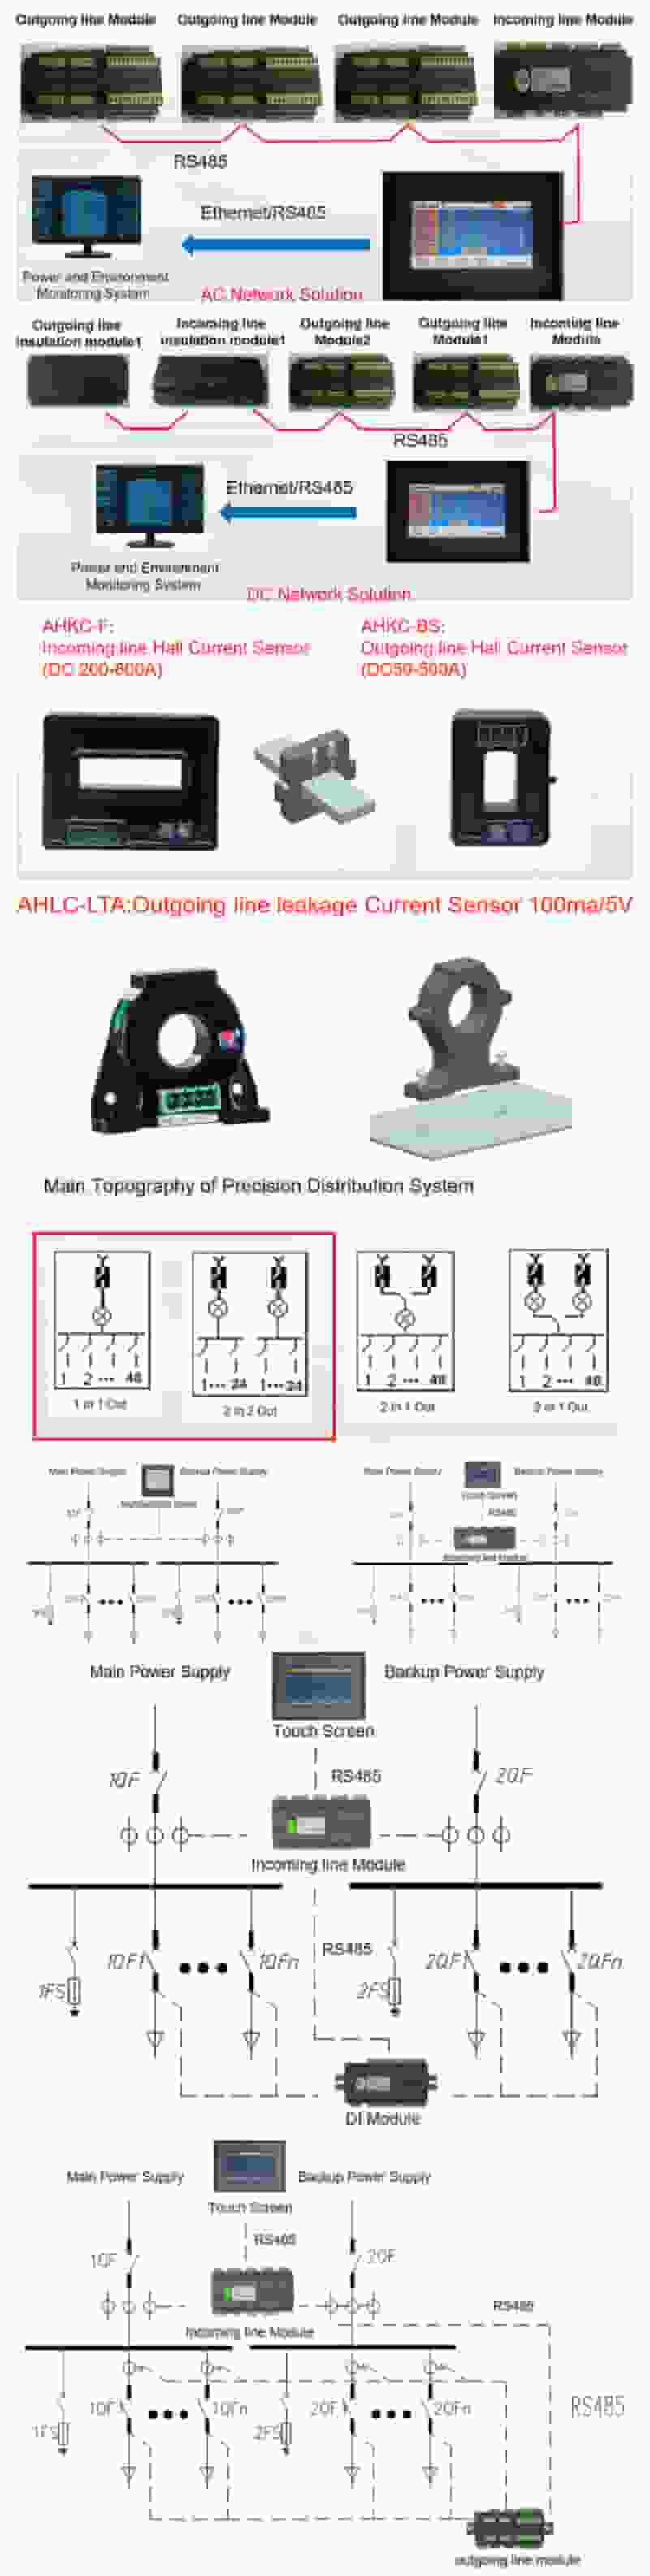 Precision Distribution Monitoring Solution For Idc Power Monitoring Device